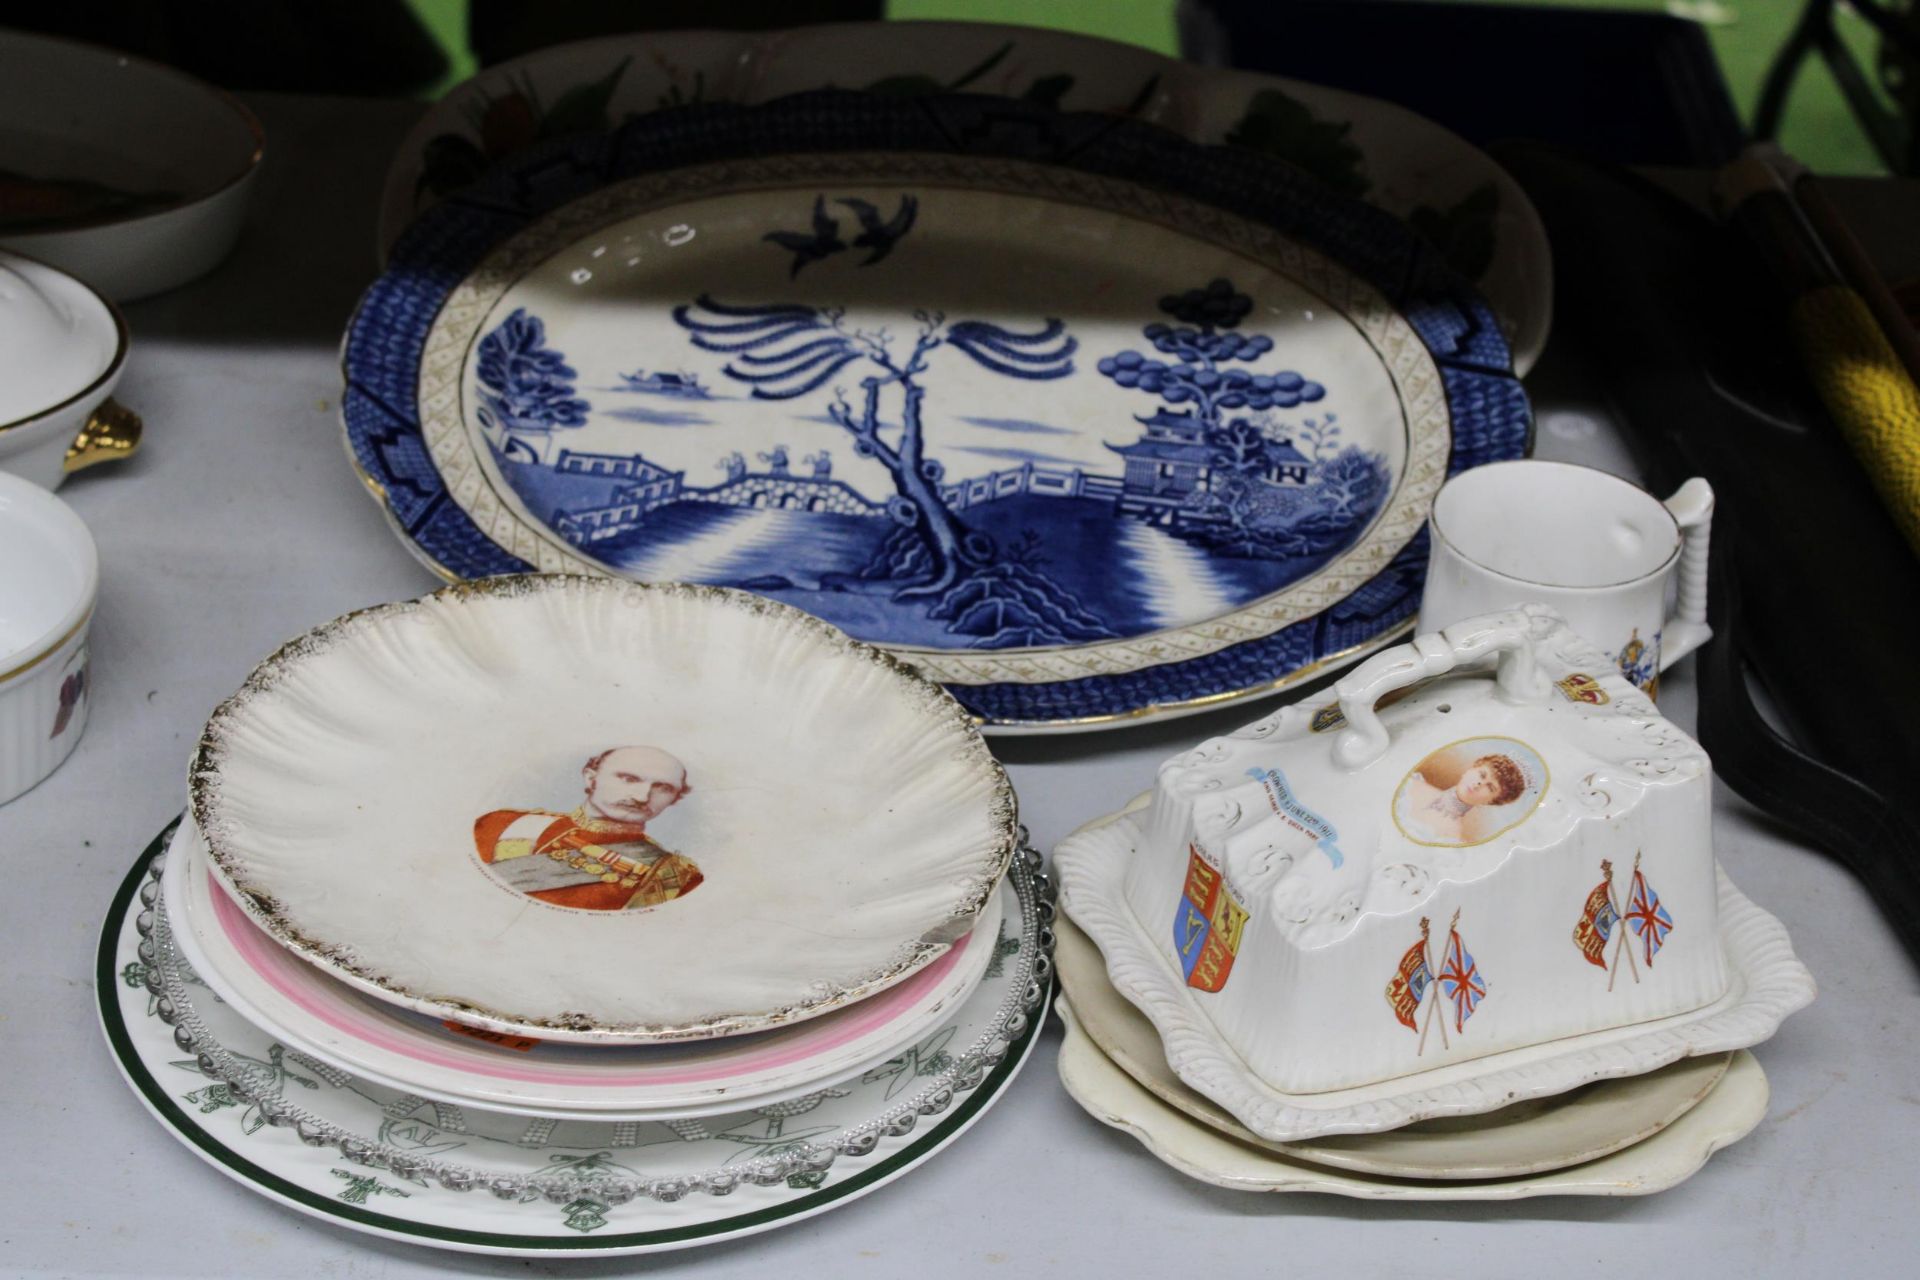 A QUANTITY OF COMMEMORATIVE CERAMICS TO INCLUDE PLATES, A CHEESE DISH AND A MUG, PLUS A LARGE WILLOW